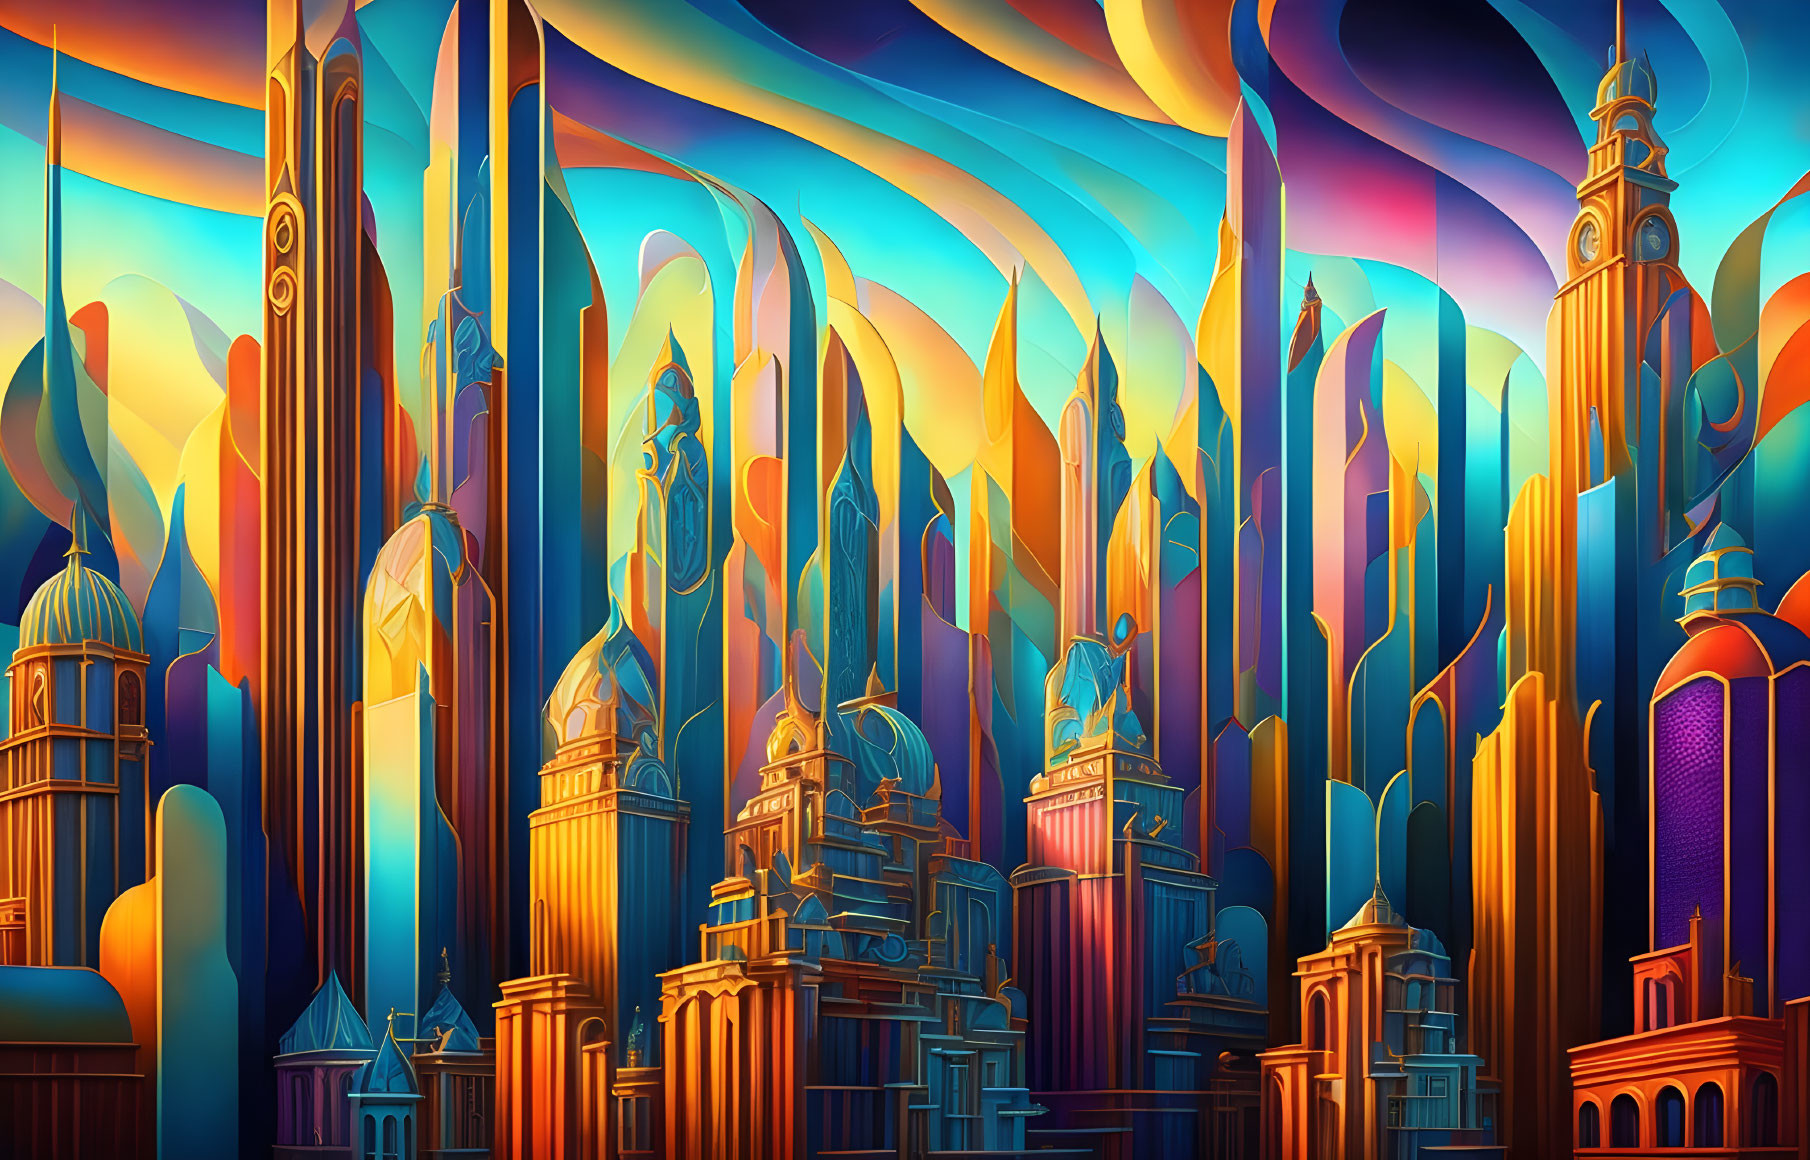 Colorful Stylized Cityscape with Swirling Skies and Sunset Hues